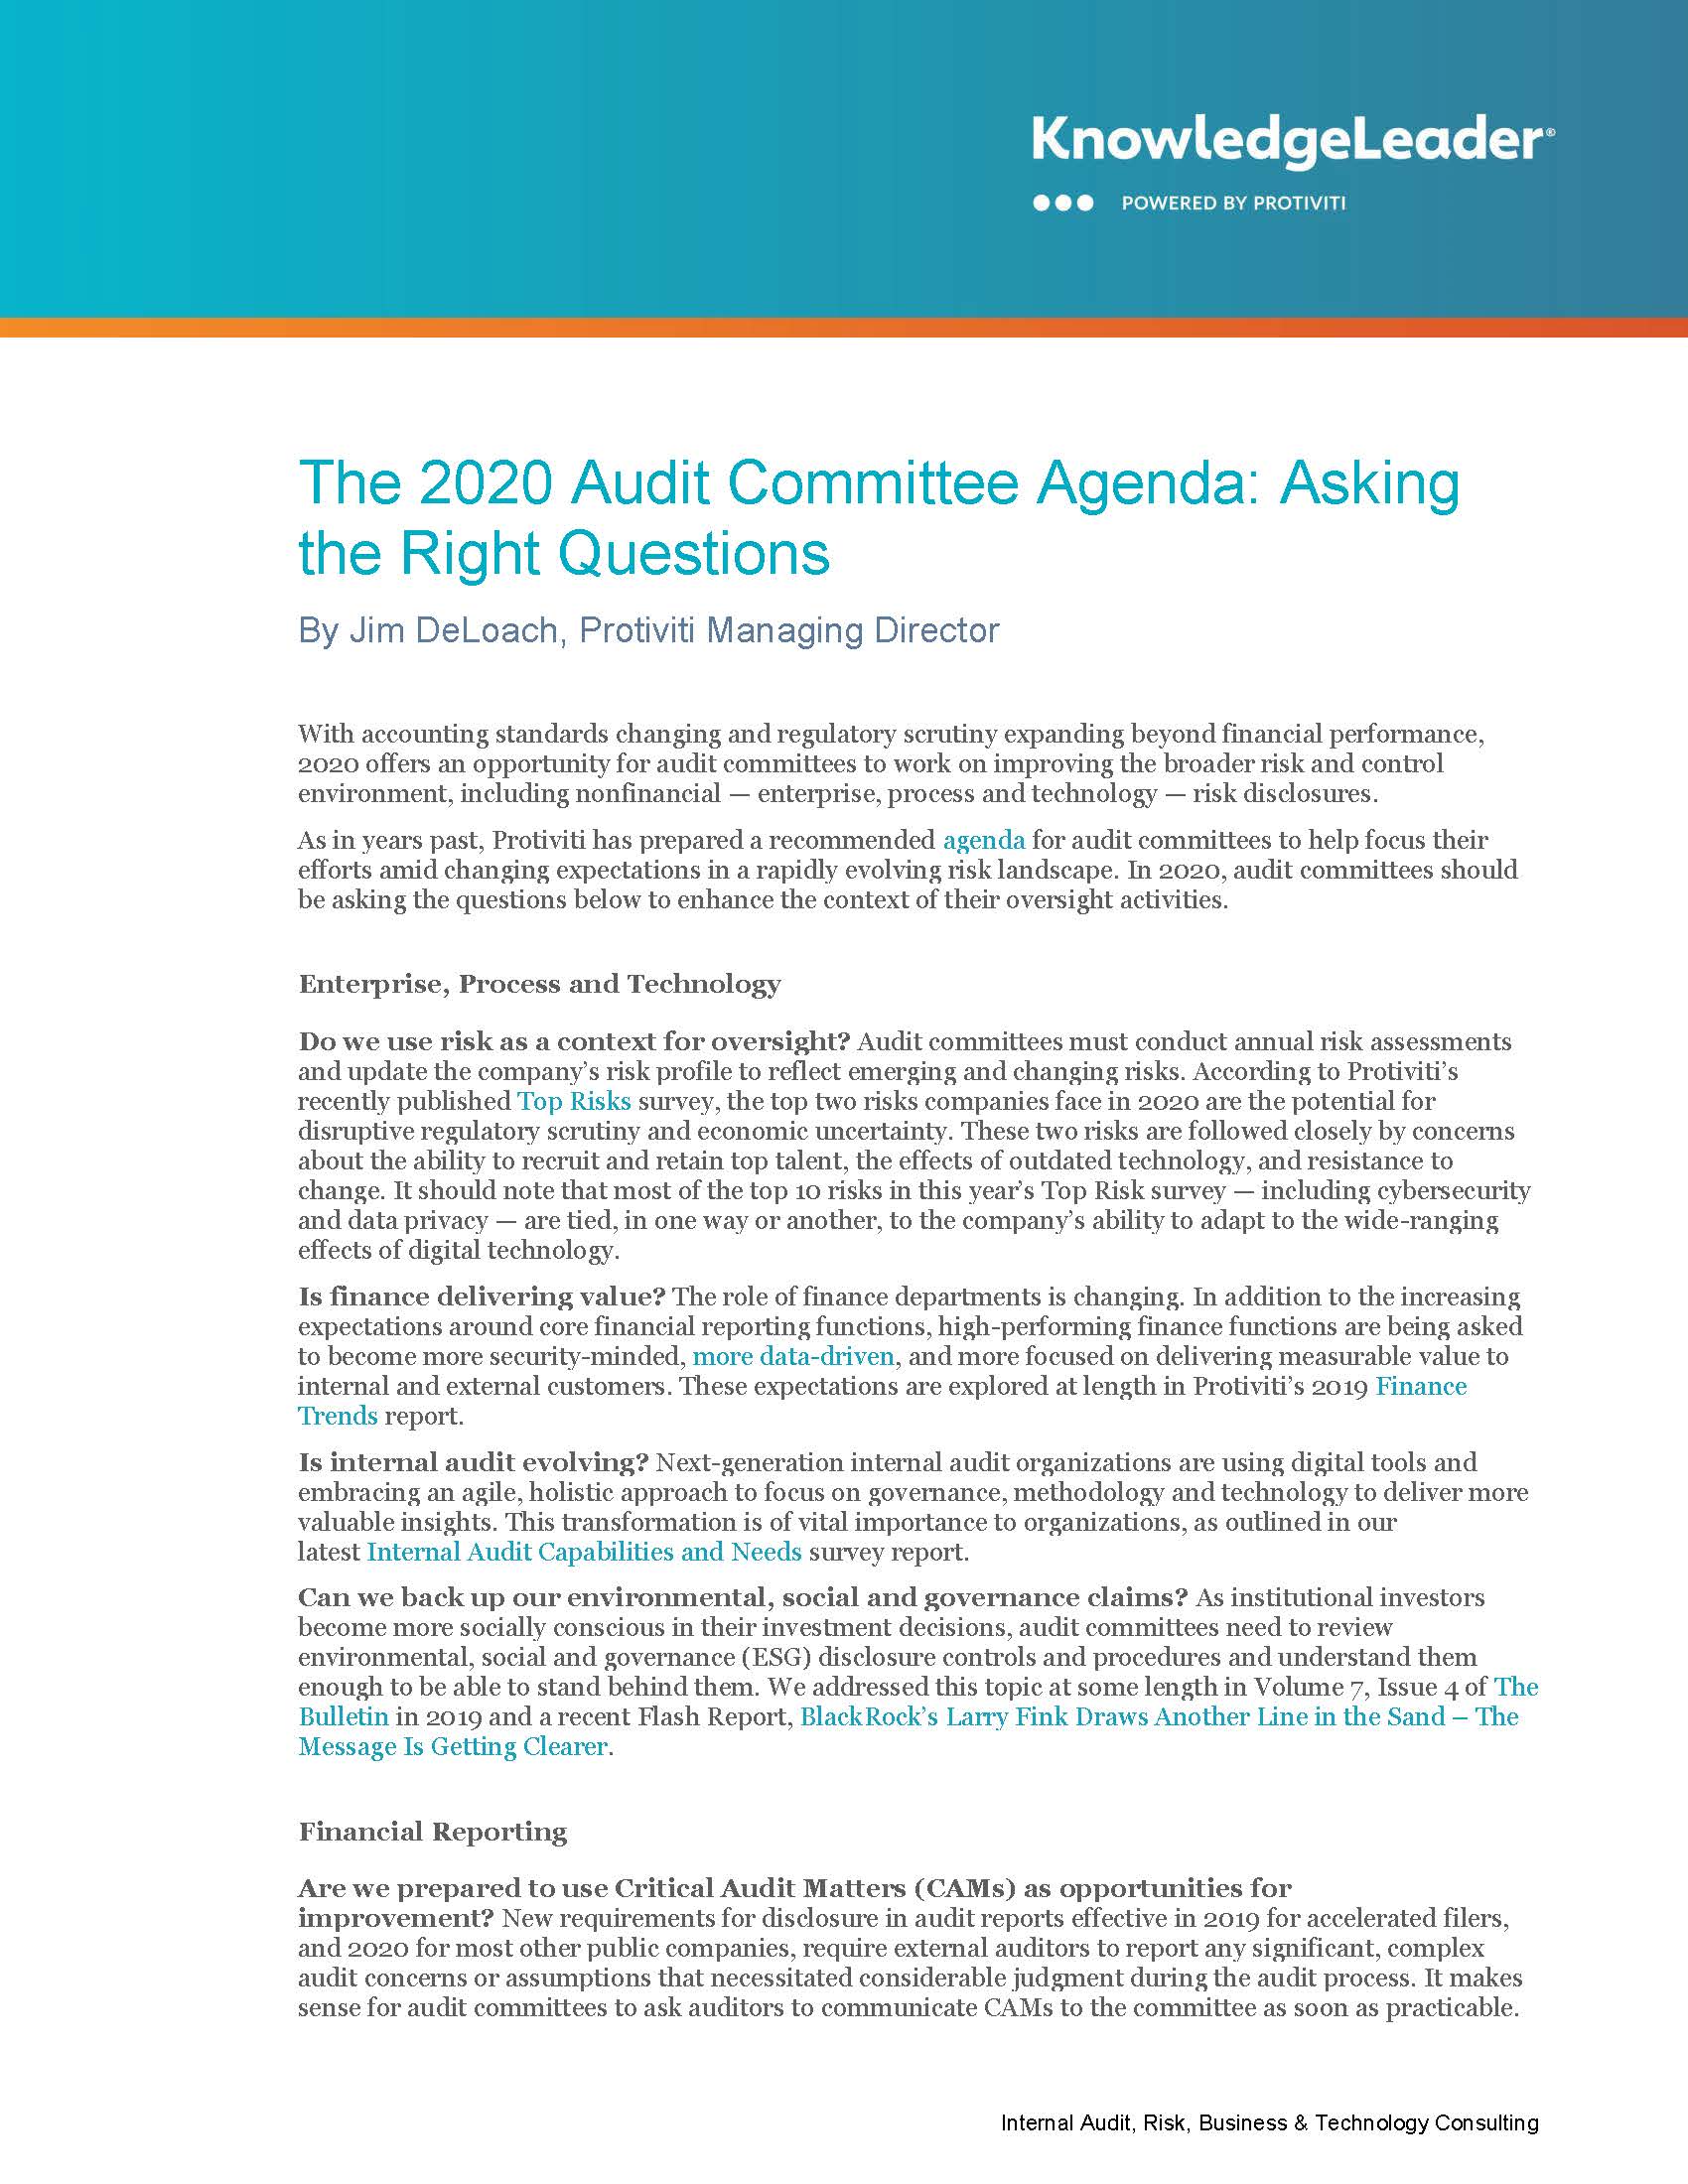 The 2020 Audit Committee Agenda: Asking the Right Questions